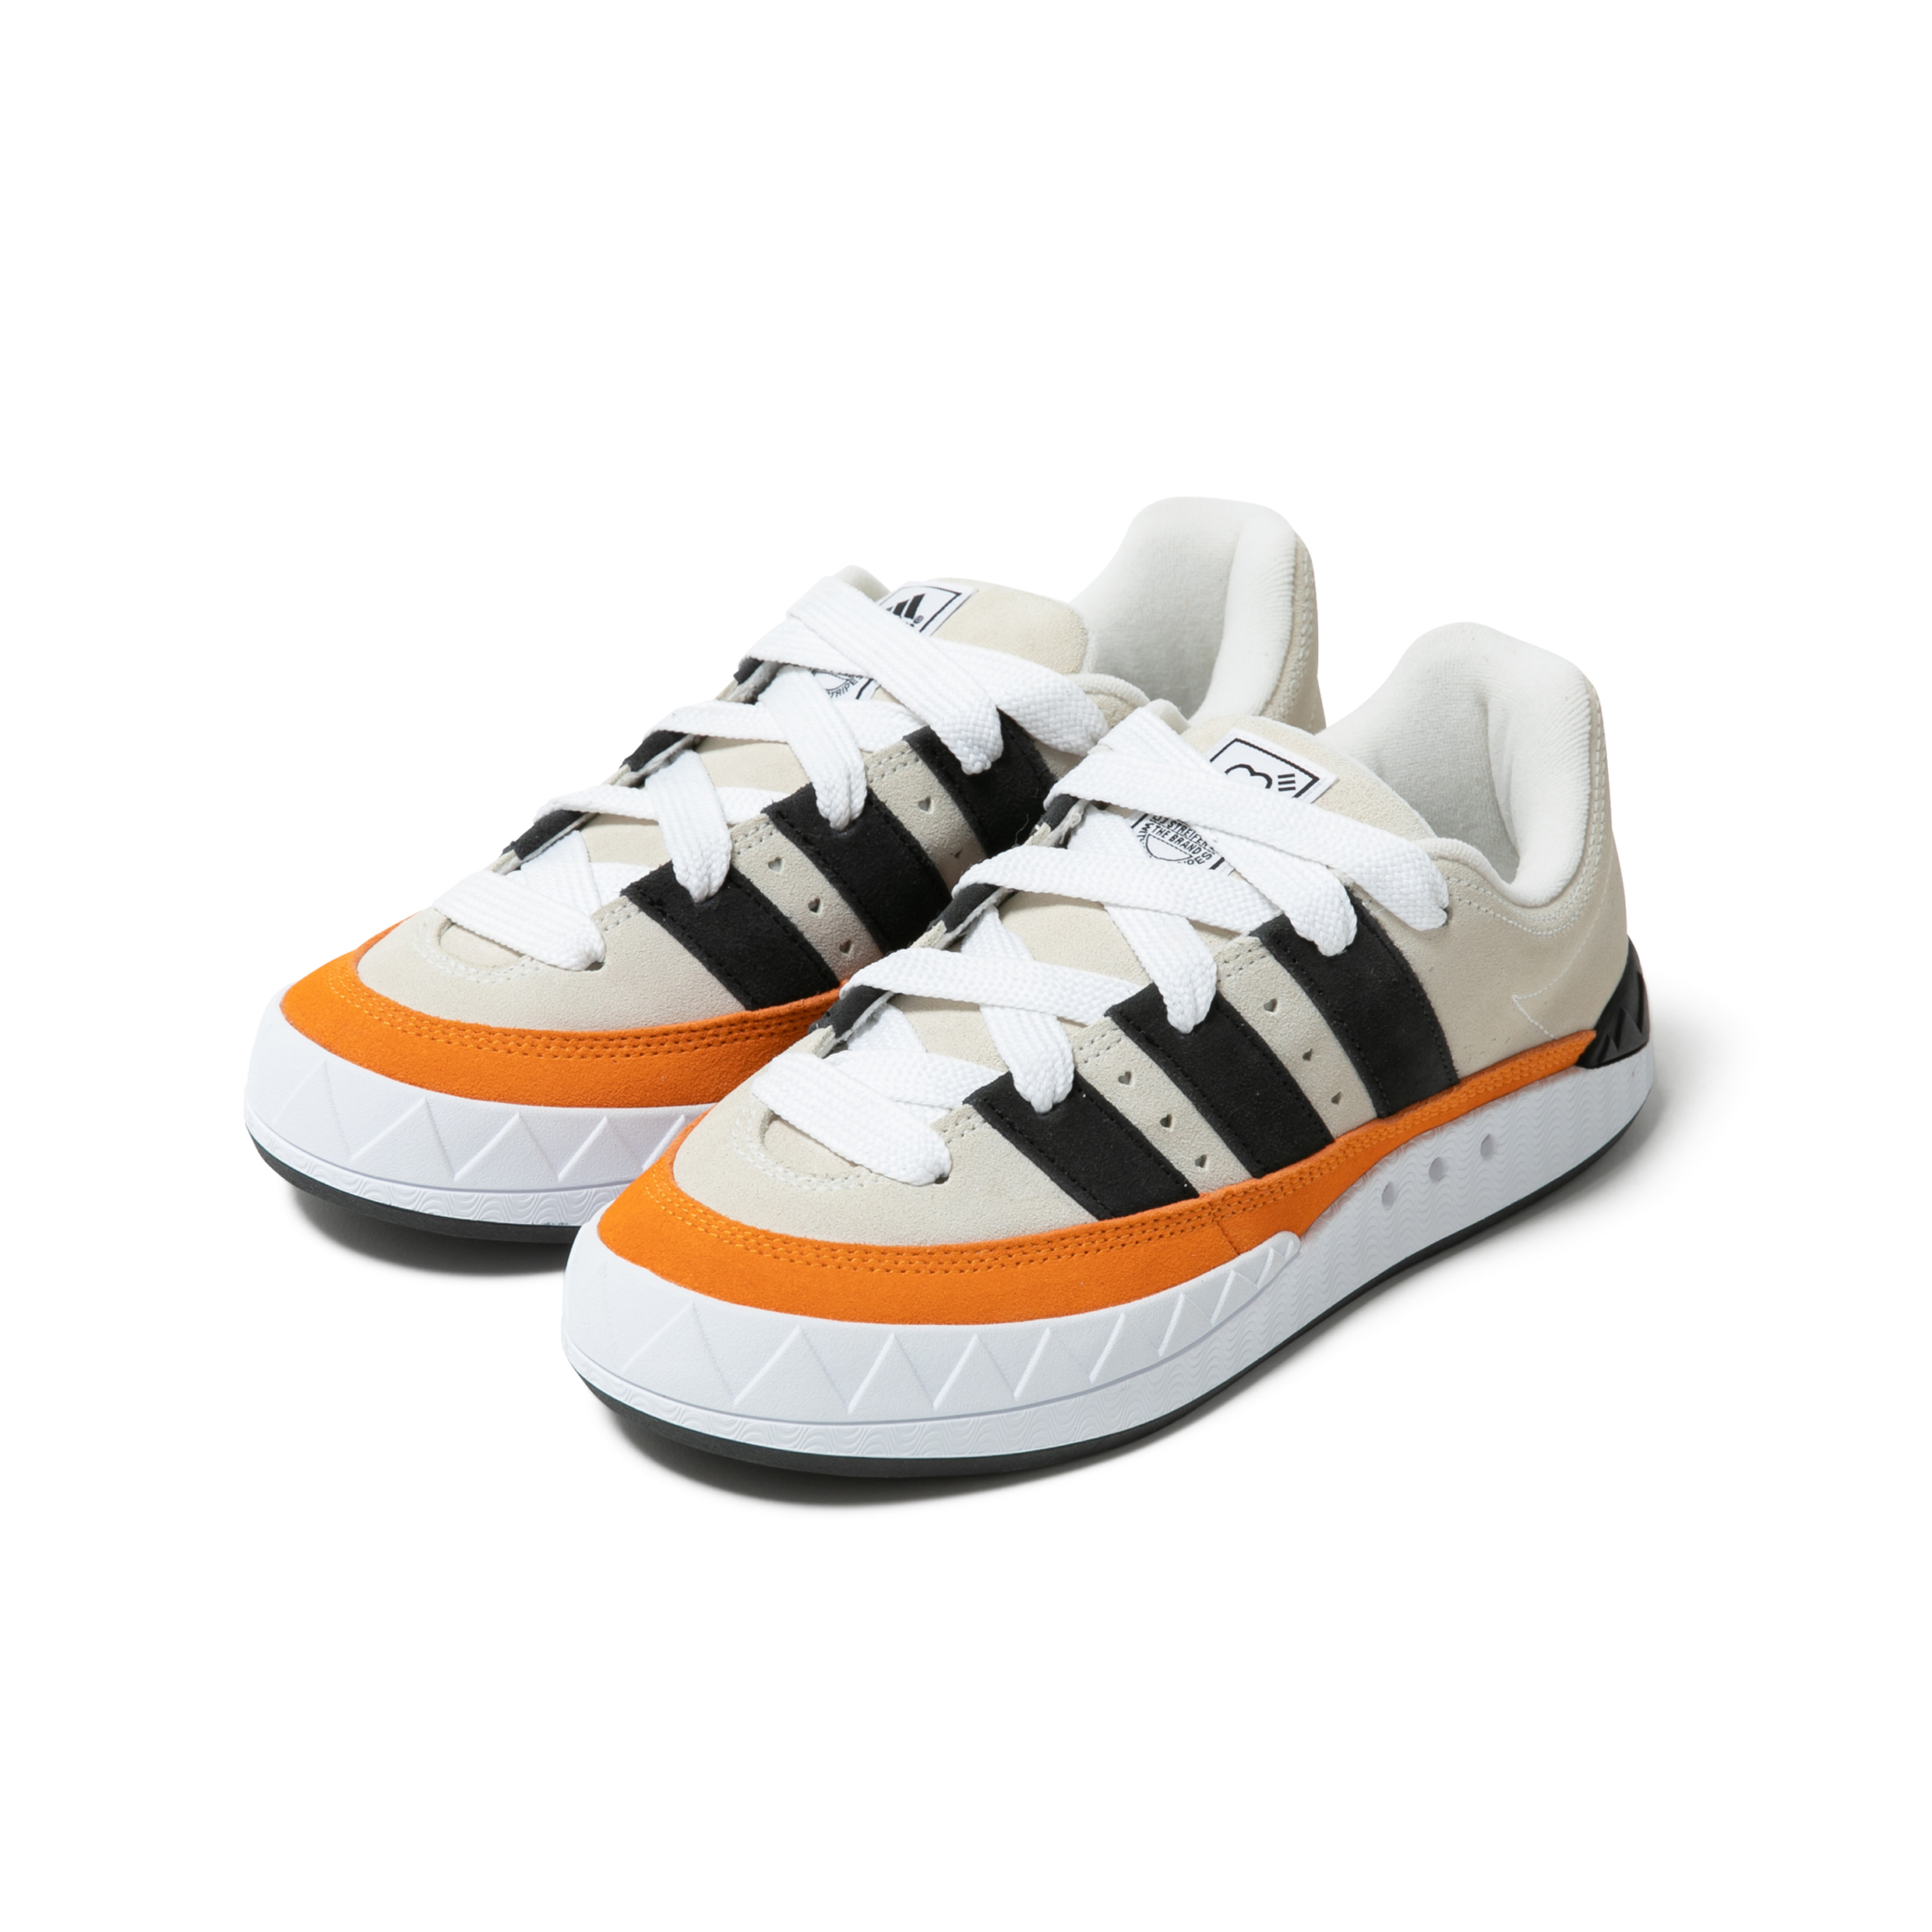 adidas Originals by HUMAN MADE “ADIMATIC HM” Exclusive Release 